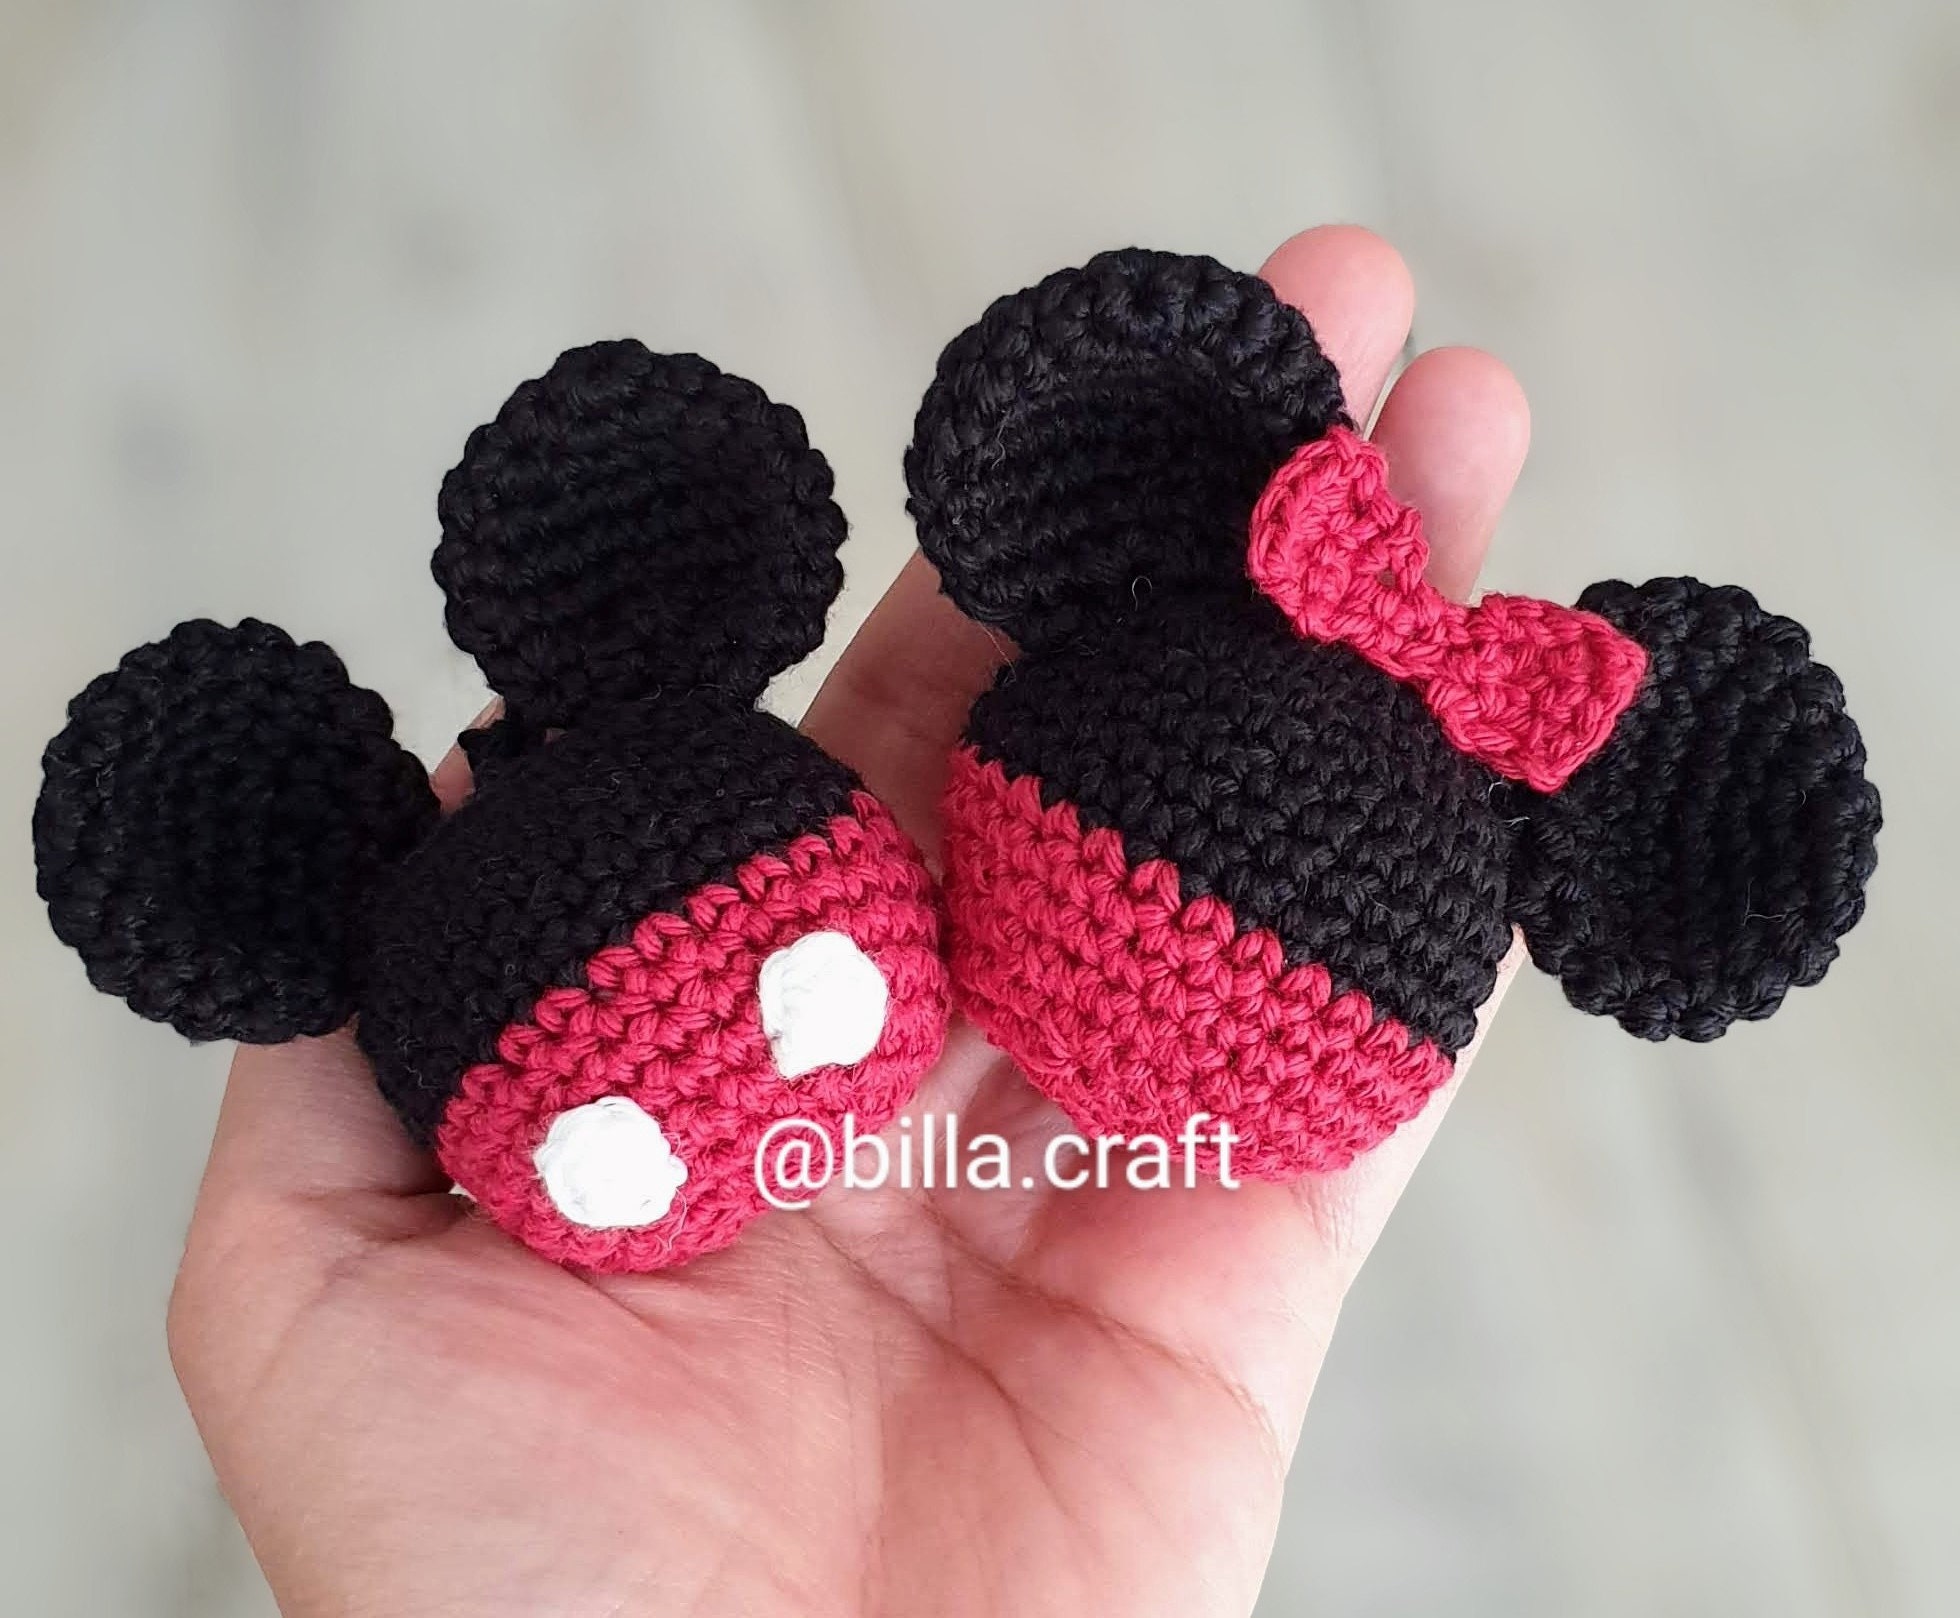 Buy Minnie Doll Clothes Online In India -  India